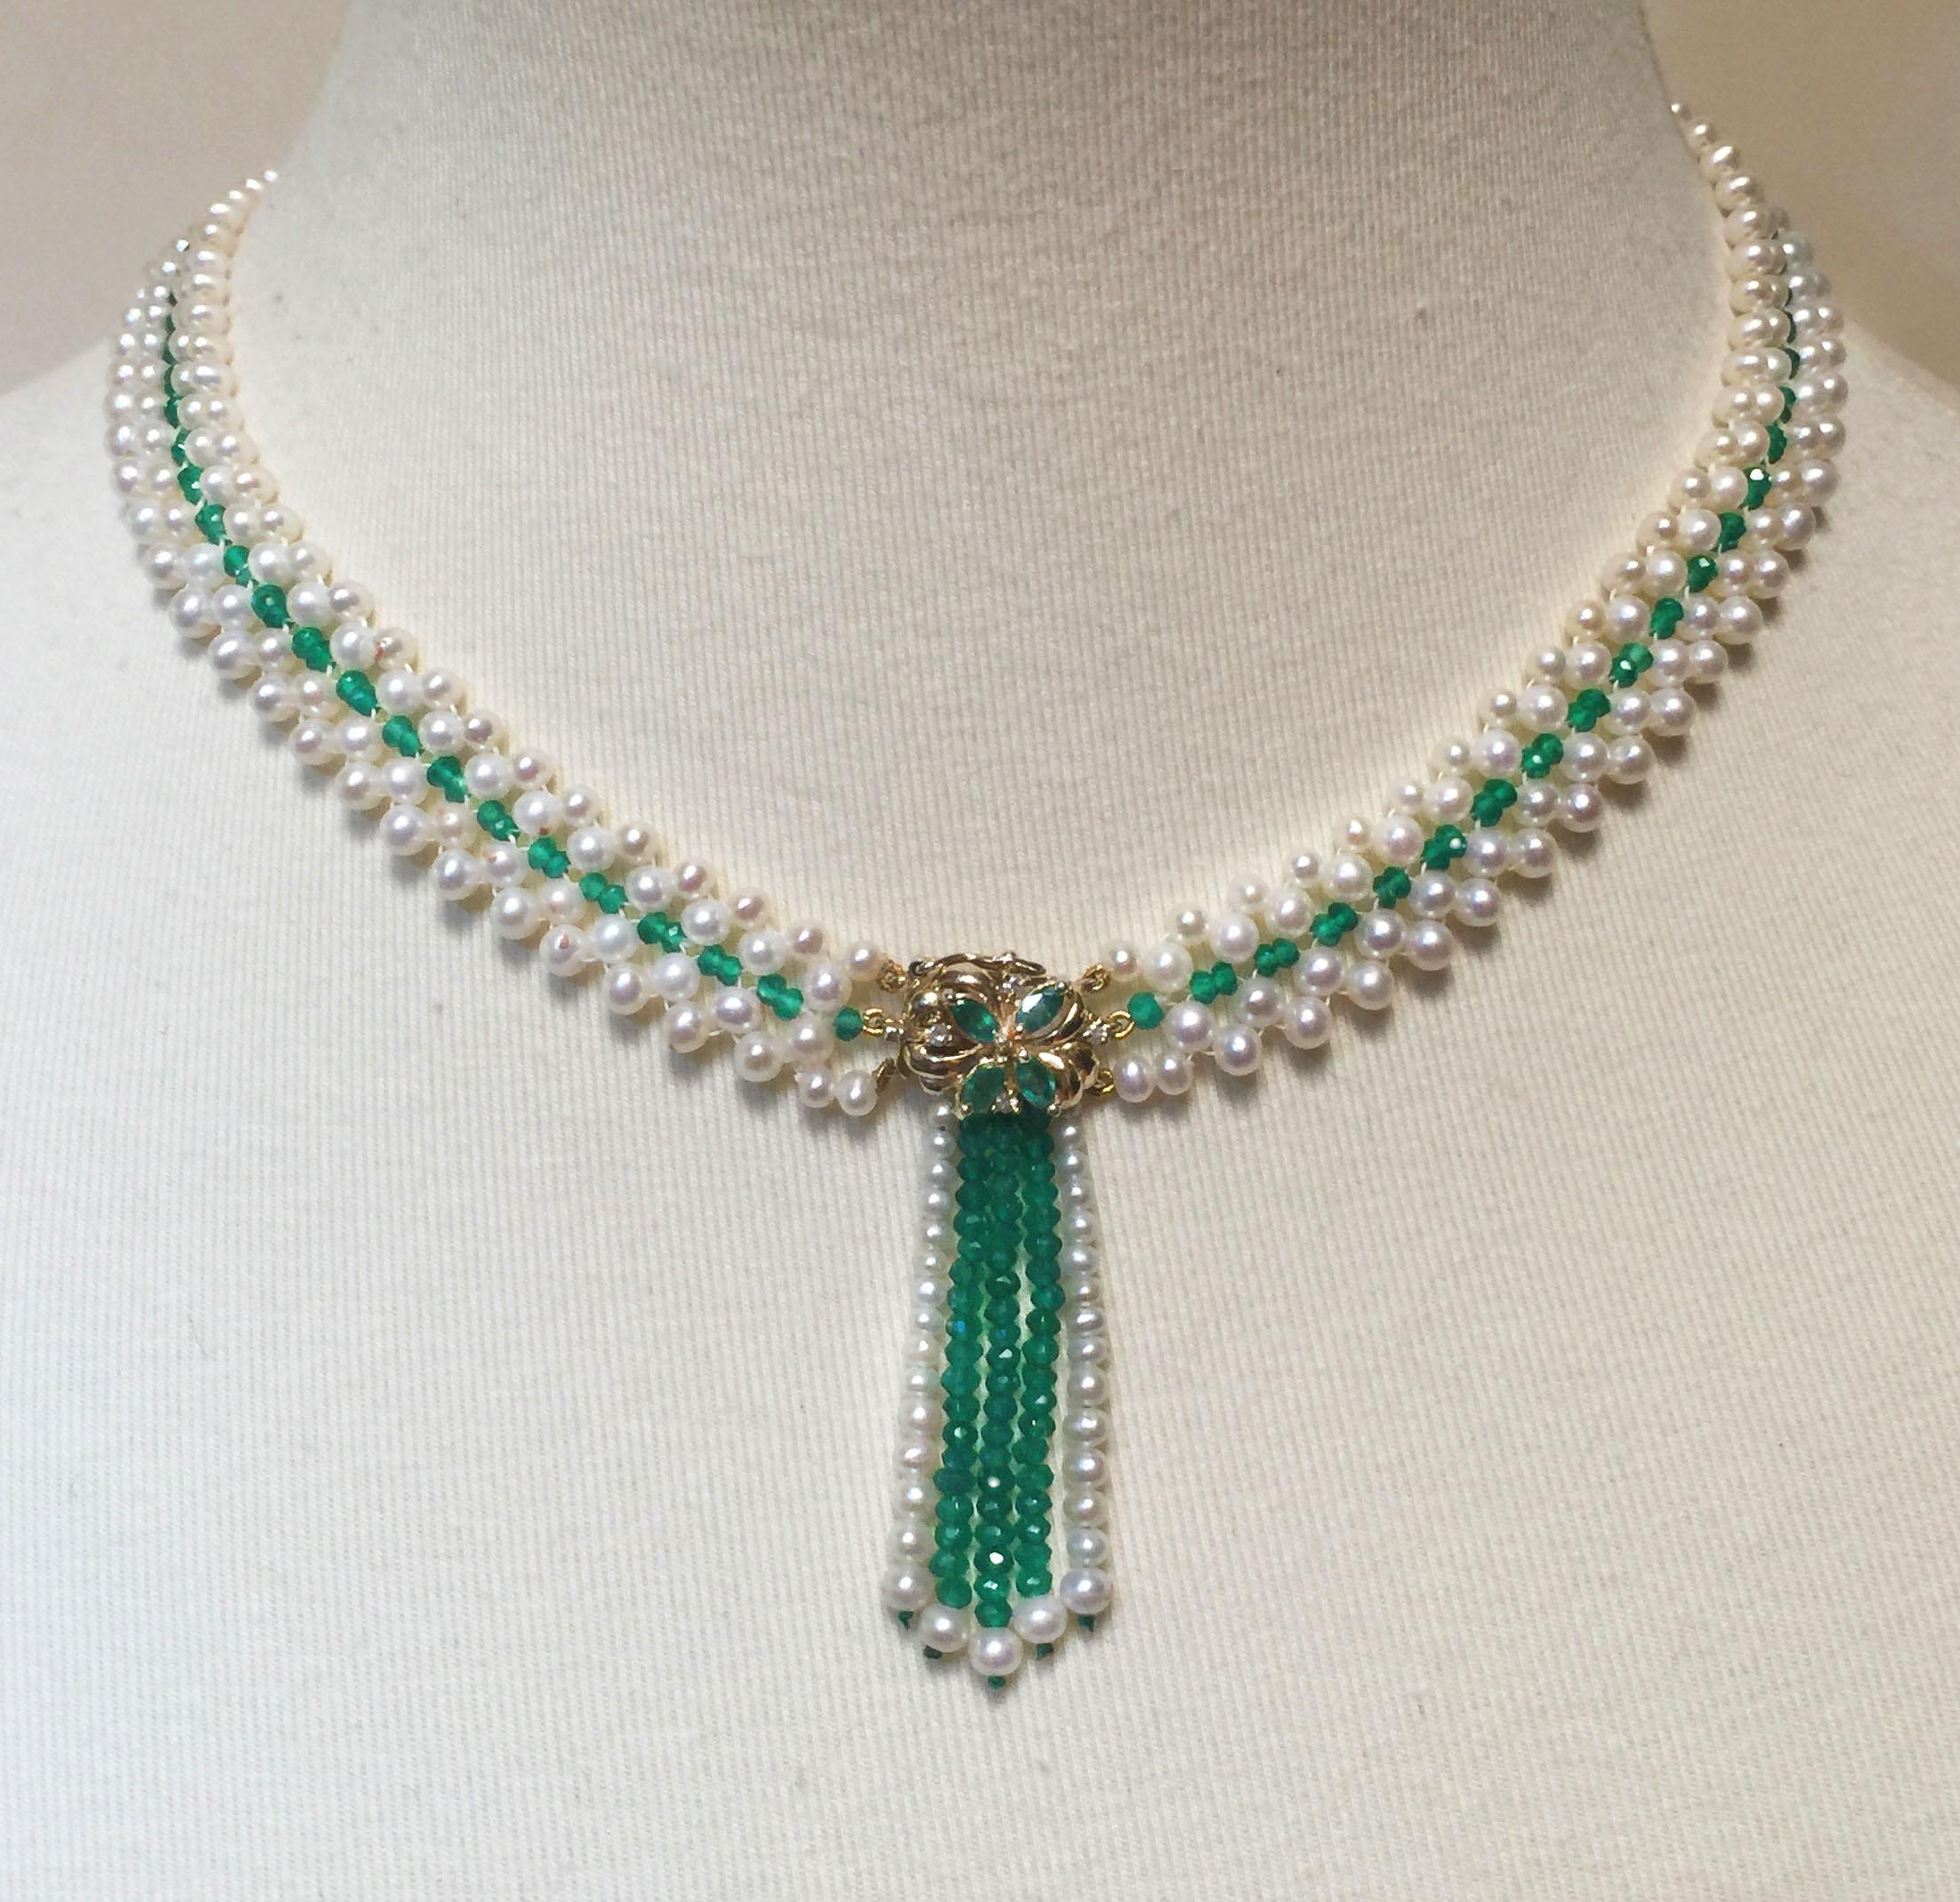  Marina J. Woven Pearl & Emerald Necklace with 14k Yellow Gold Centerpiece-Clasp 2